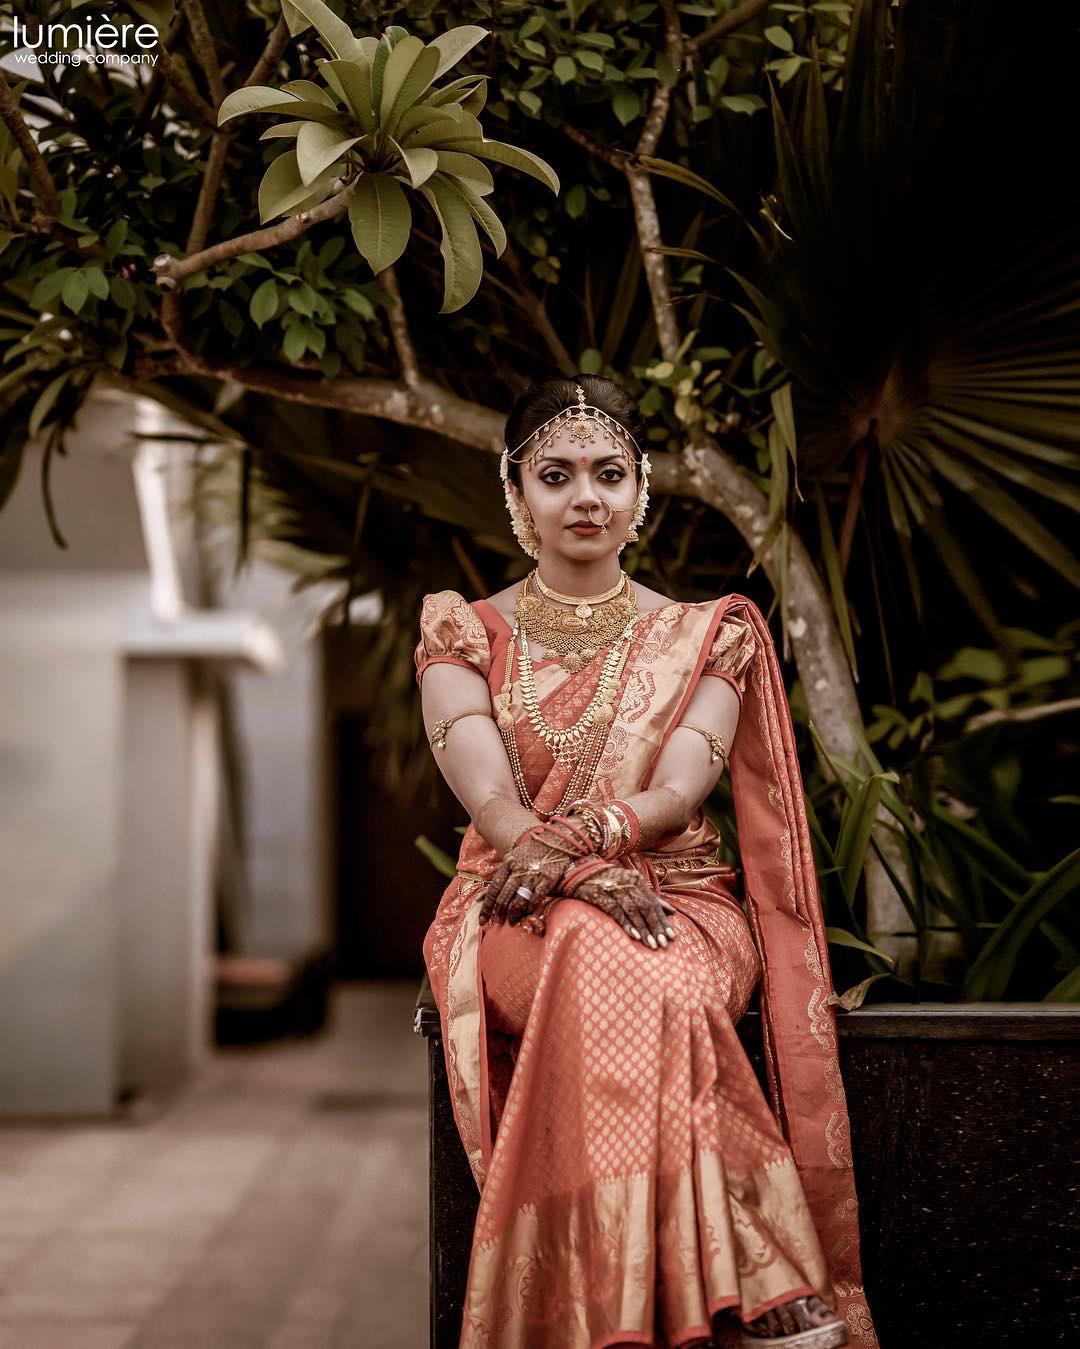 South Indian Bridal Photography Ideas - Best Poses of South Indian Bride | Indian  bride poses, South indian bride, Indian bride